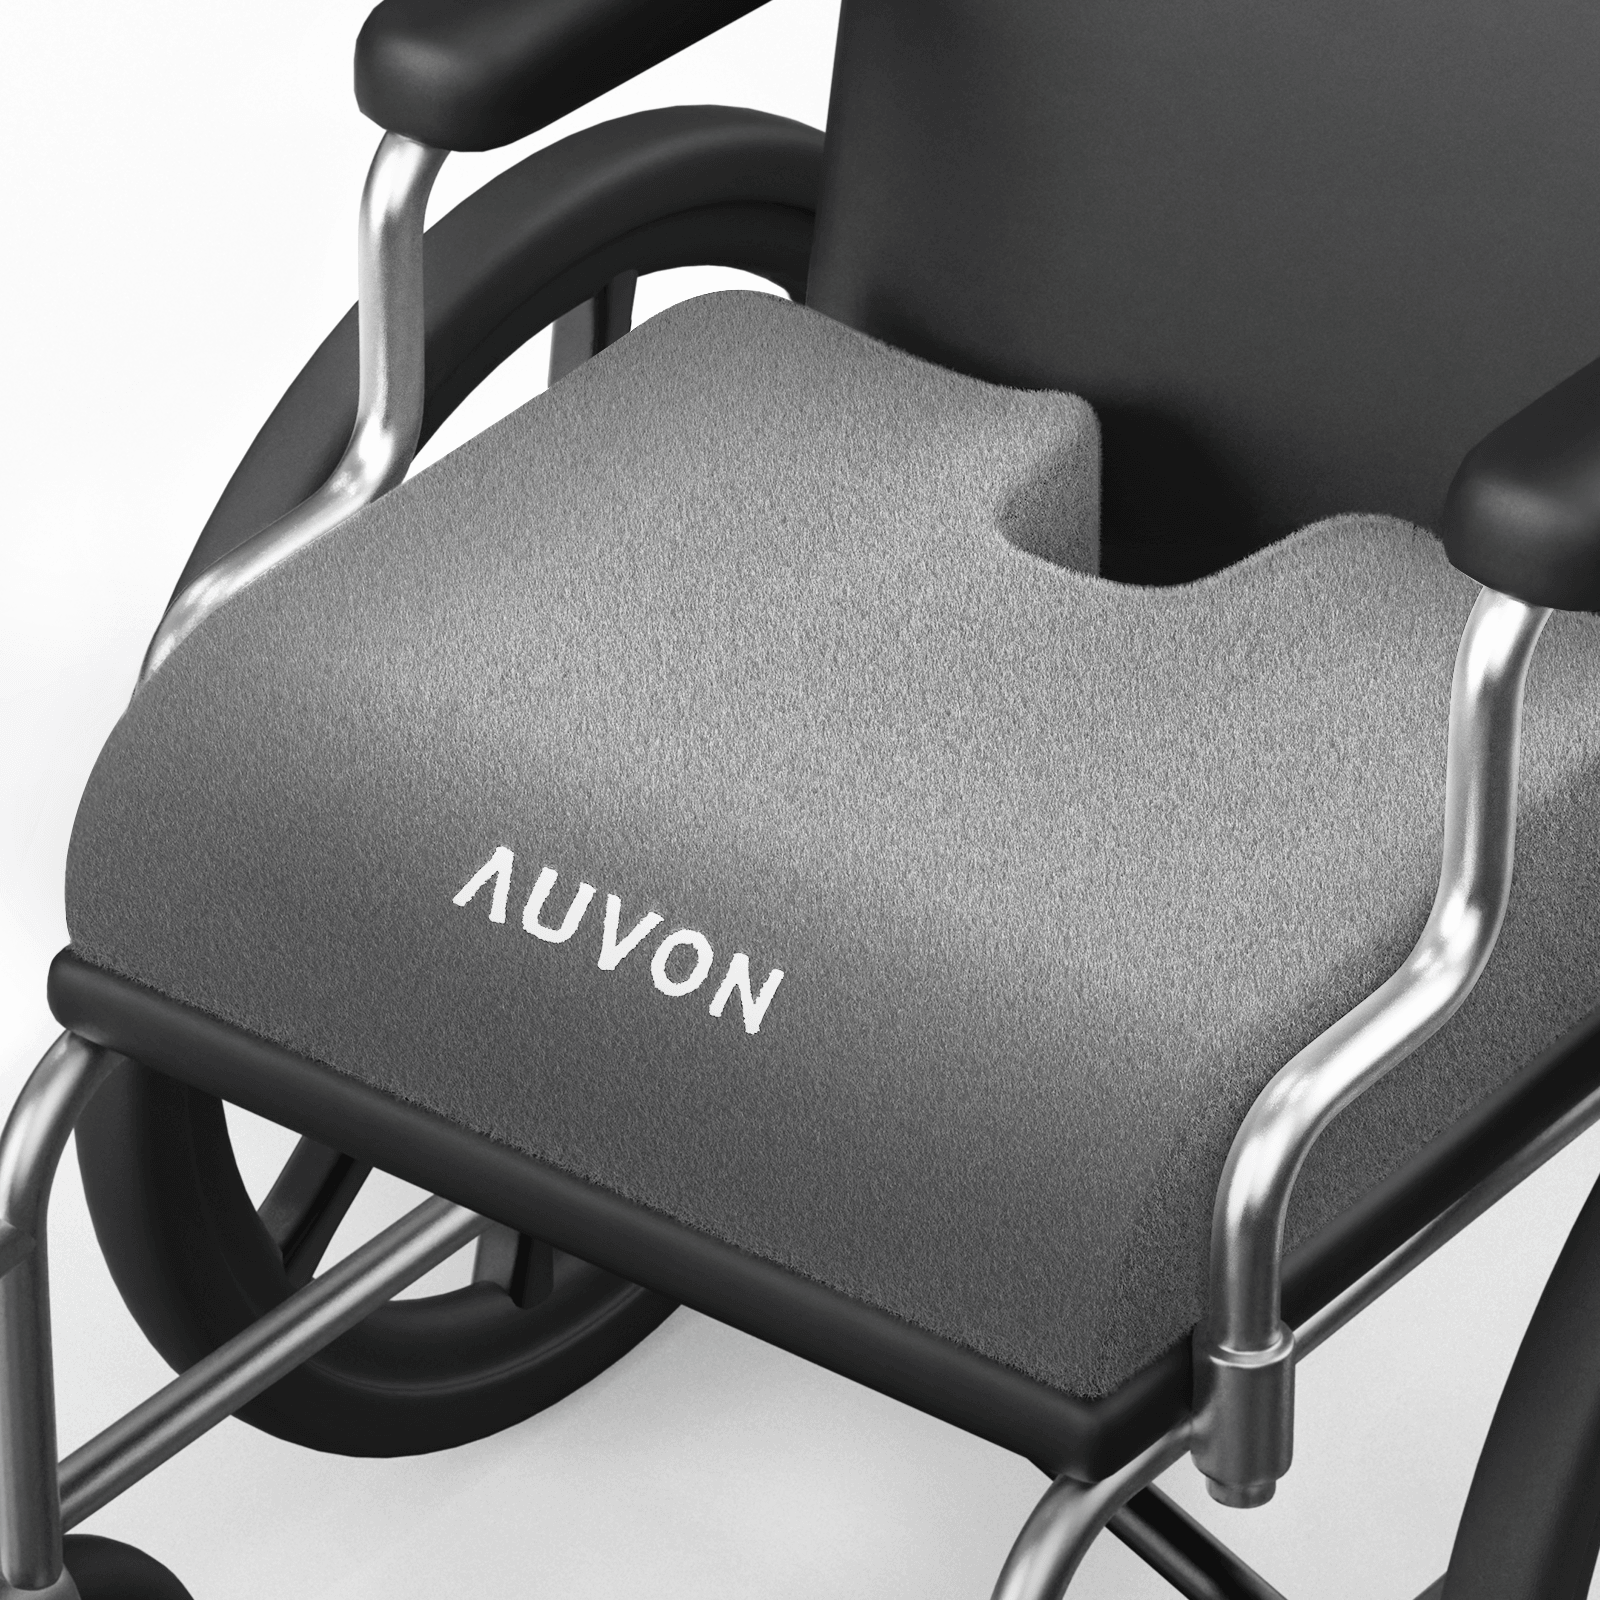 https://auvonhealth.com/cdn/shop/files/auvon-wheelchair-seat-cushions-18-x16-x3-for-sciatica-back-coccyx-pressure-sore-and-ulcer-pain-relief-memory-foam-pressure-relief-cushion-with-removable-strap-breathable-and-waterproo_78f0188f-73ca-4e27-a572-e4977405e1fa.png?v=1686019893